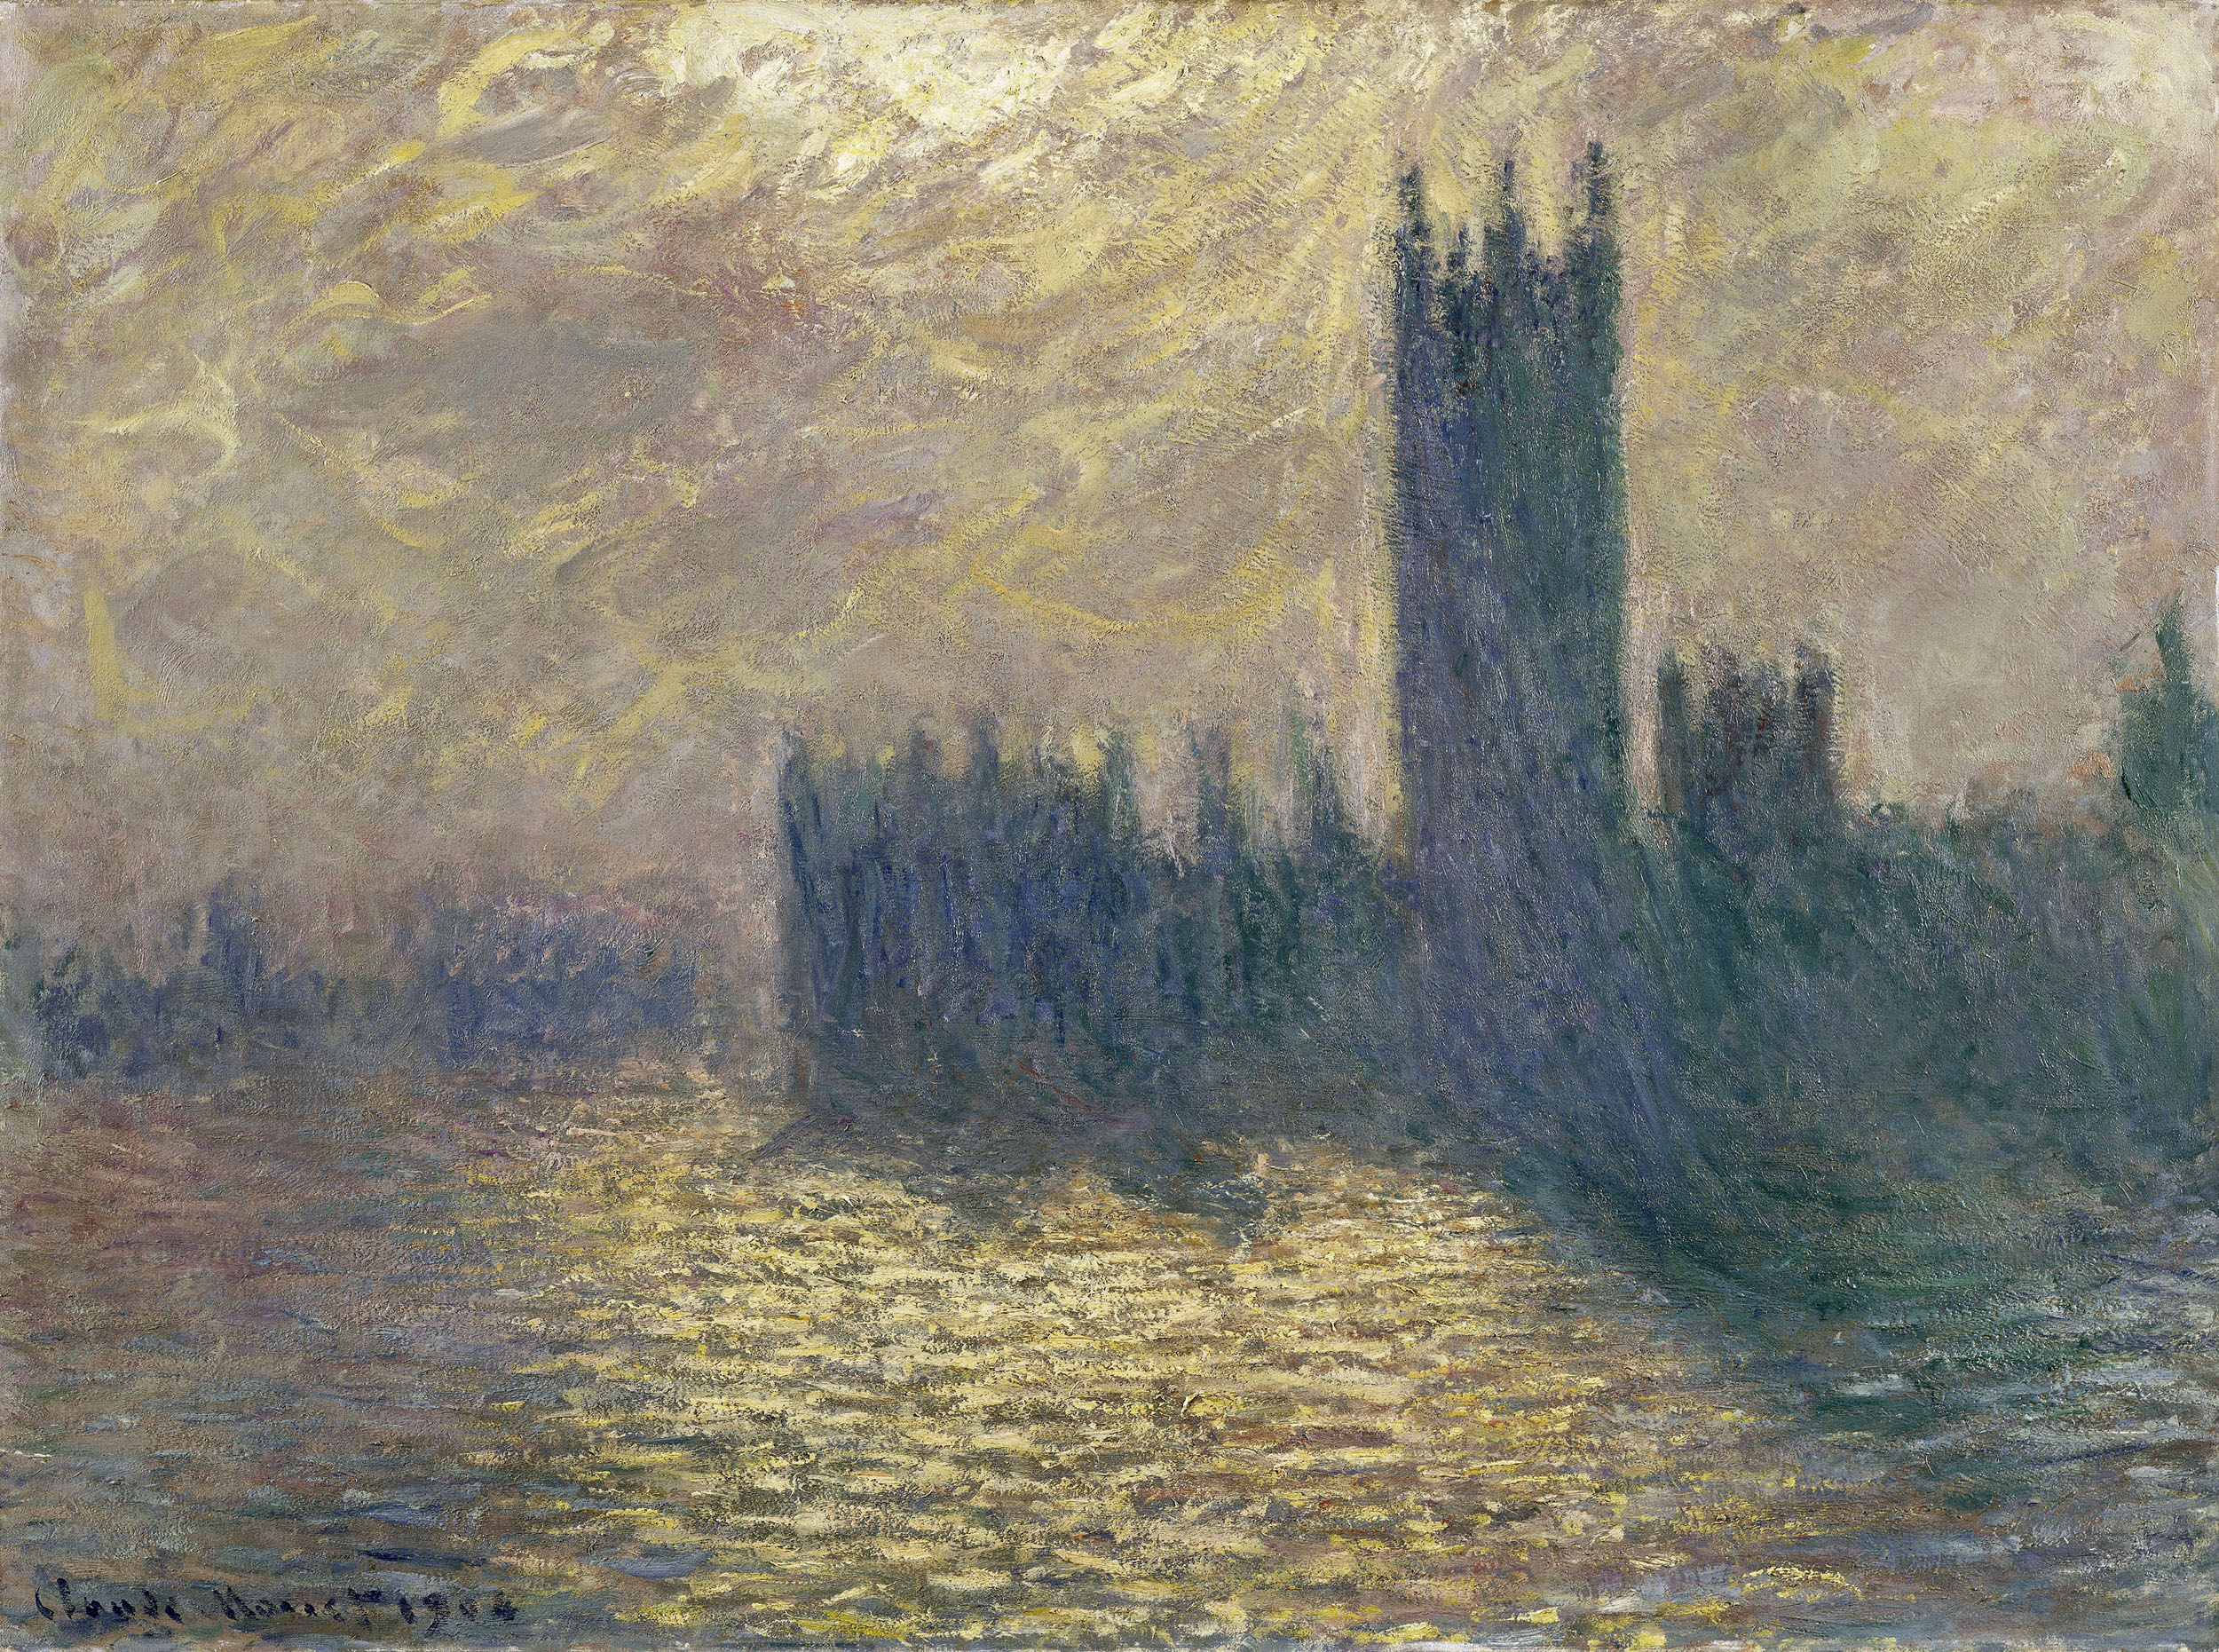 Claude Monet (French, 1840-1926) 'Houses of Parliament, Stormy Sky' 1904